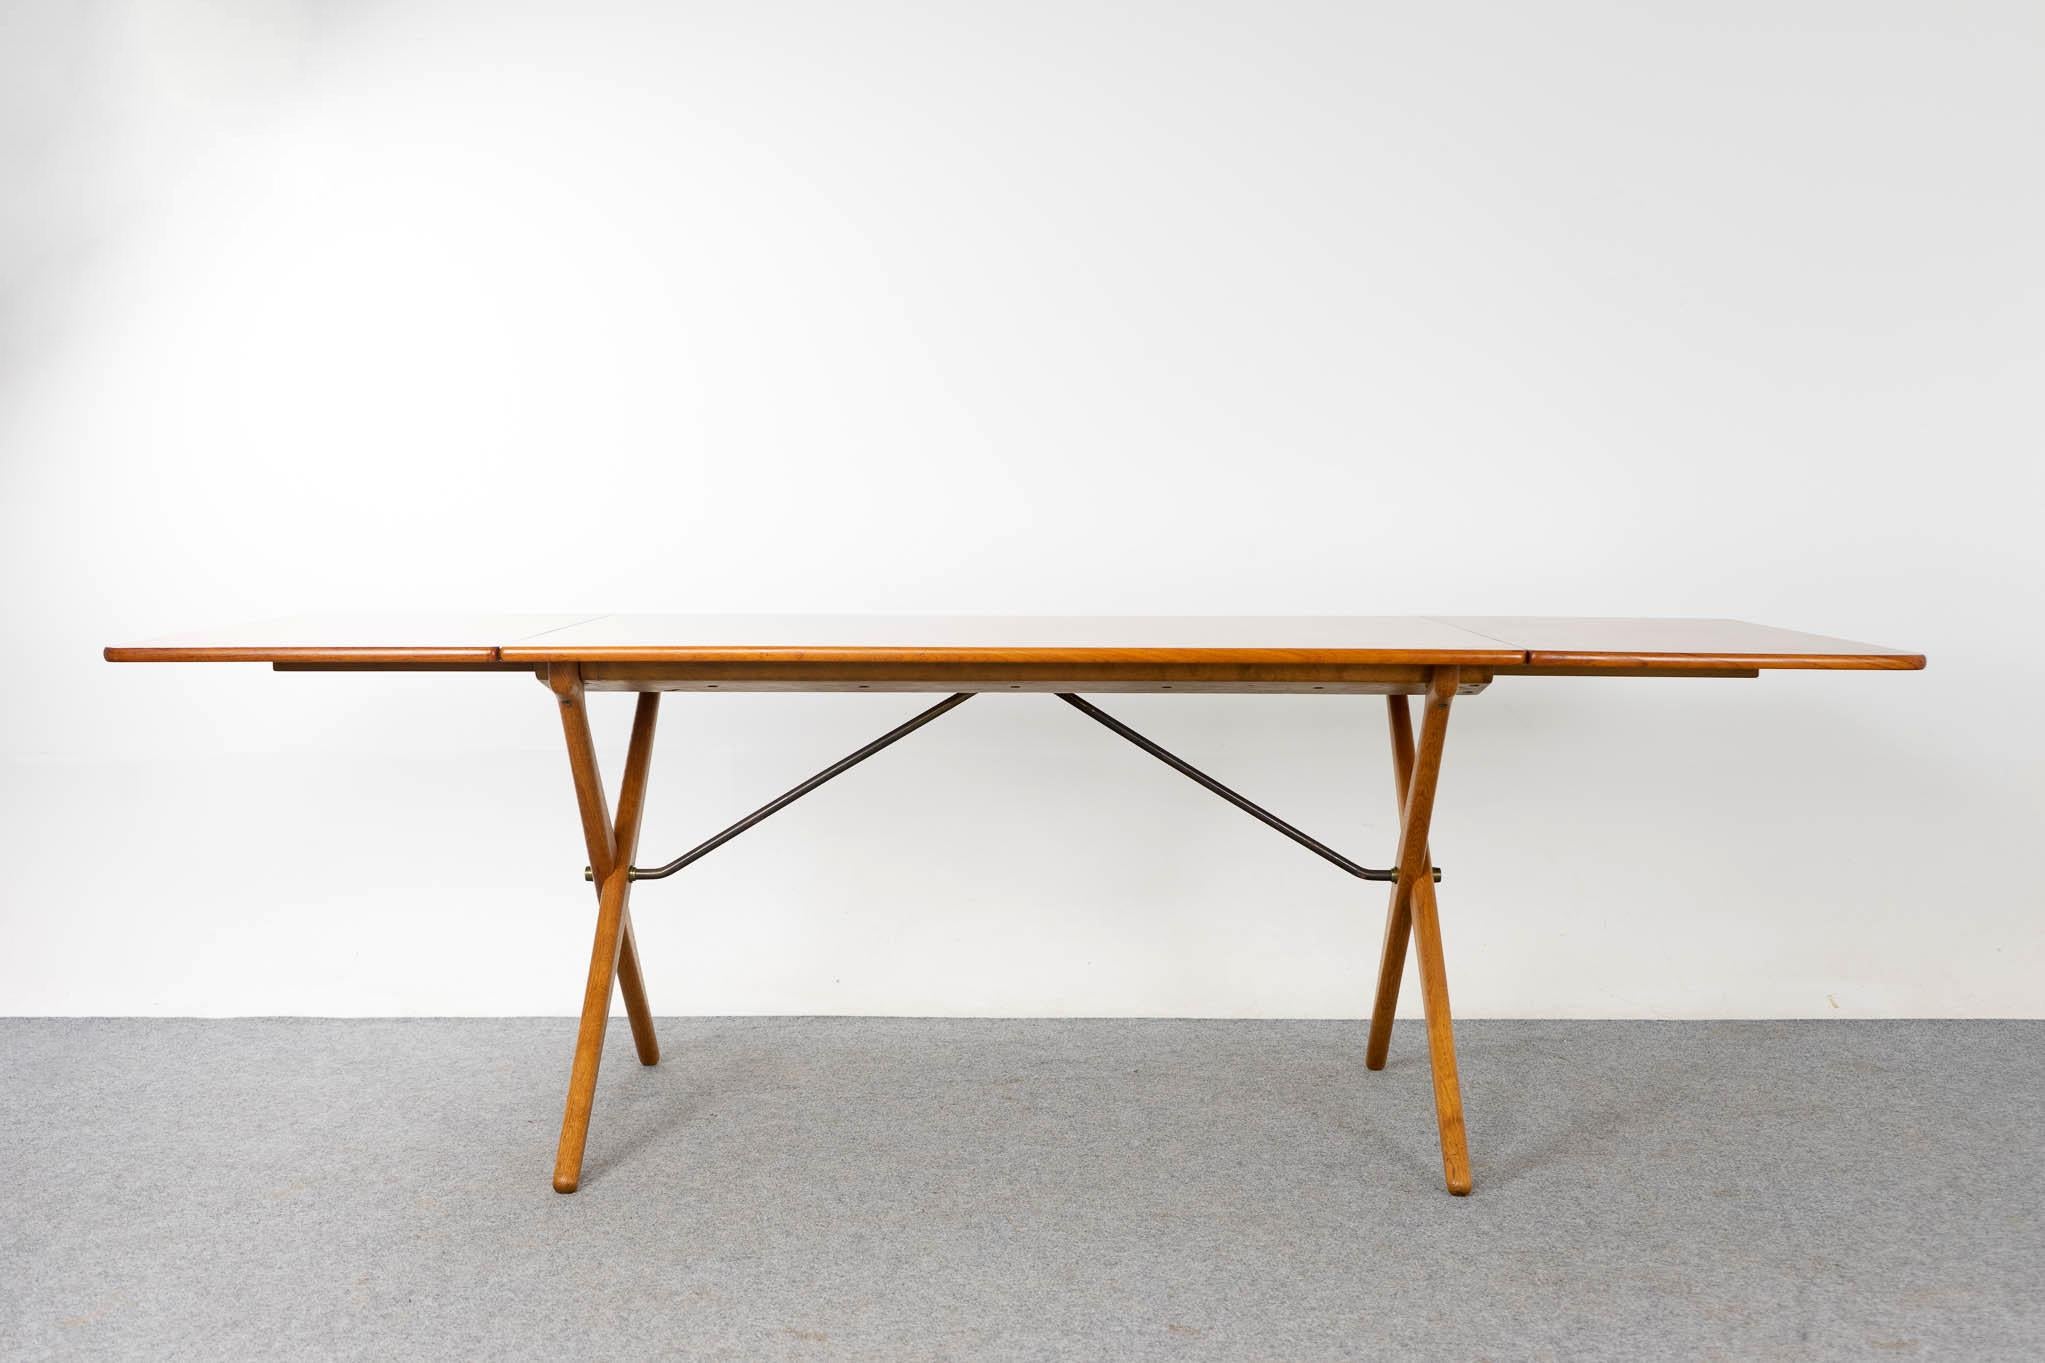 Teak and oak Danish AT-309 dining table by Hans Wegner, produced by Andreas Tuck, circa 1950's. Stunning drop leaf table with unique cross legged solid oak base with elegant brass support detailing. Table top shows minor veneer wear, expertly